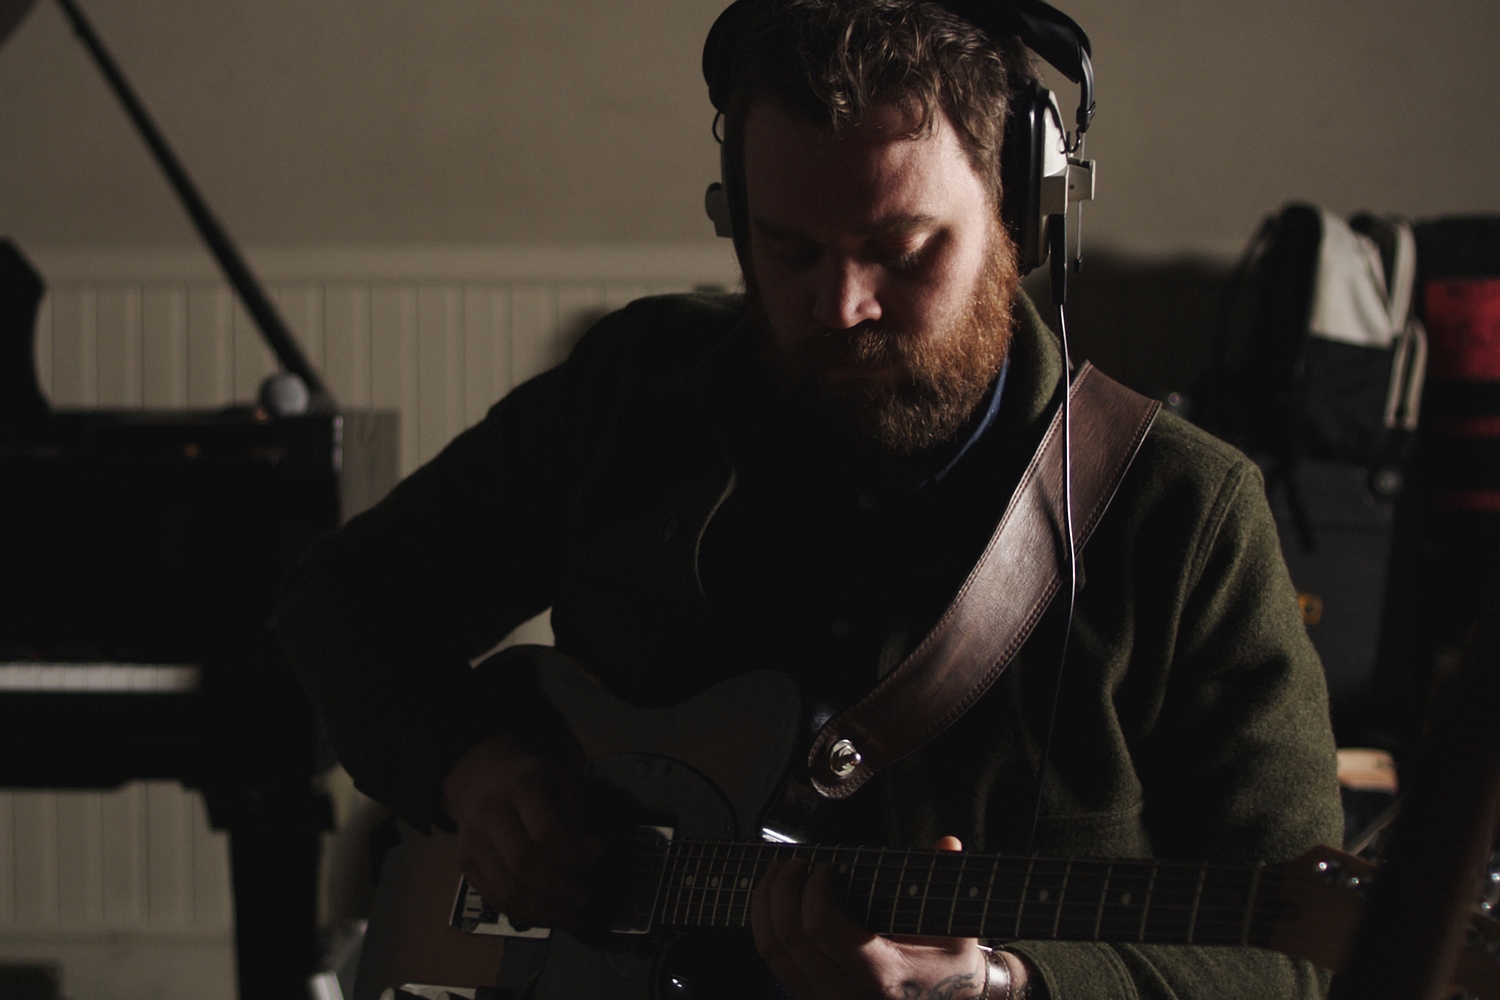 See Scott Hutchison perform Frightened Rabbit’s ‘Poke’ on US television